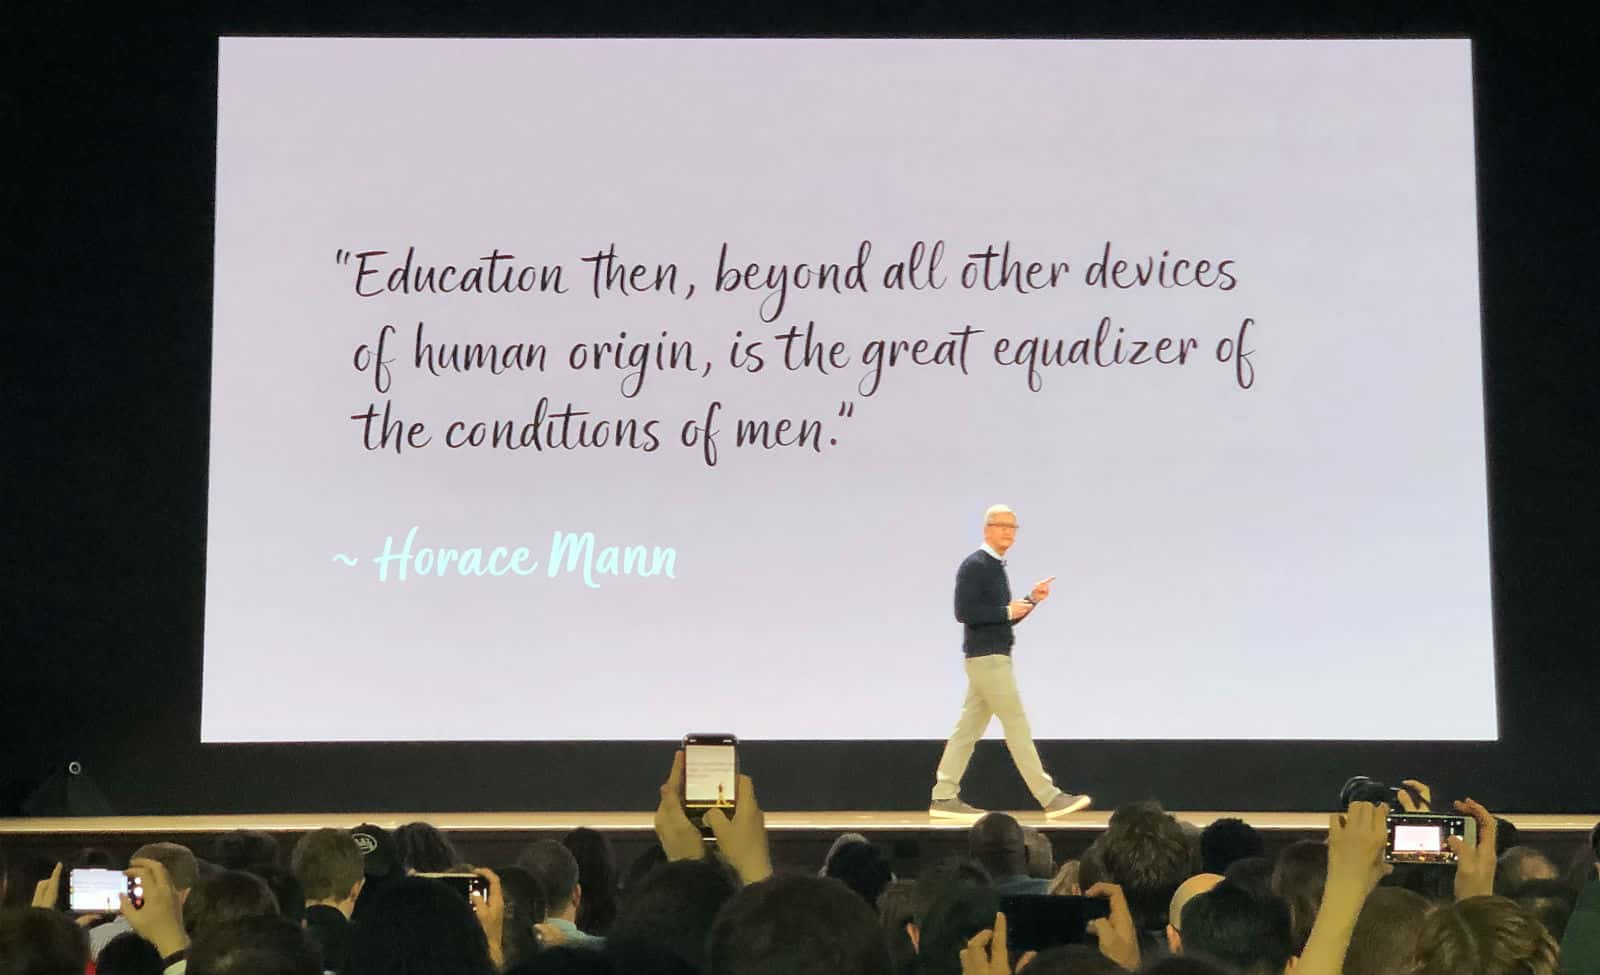 “Education then, beyond all others devices of human origin, is the great equalizer of the conditions of men.” - Horace Mann